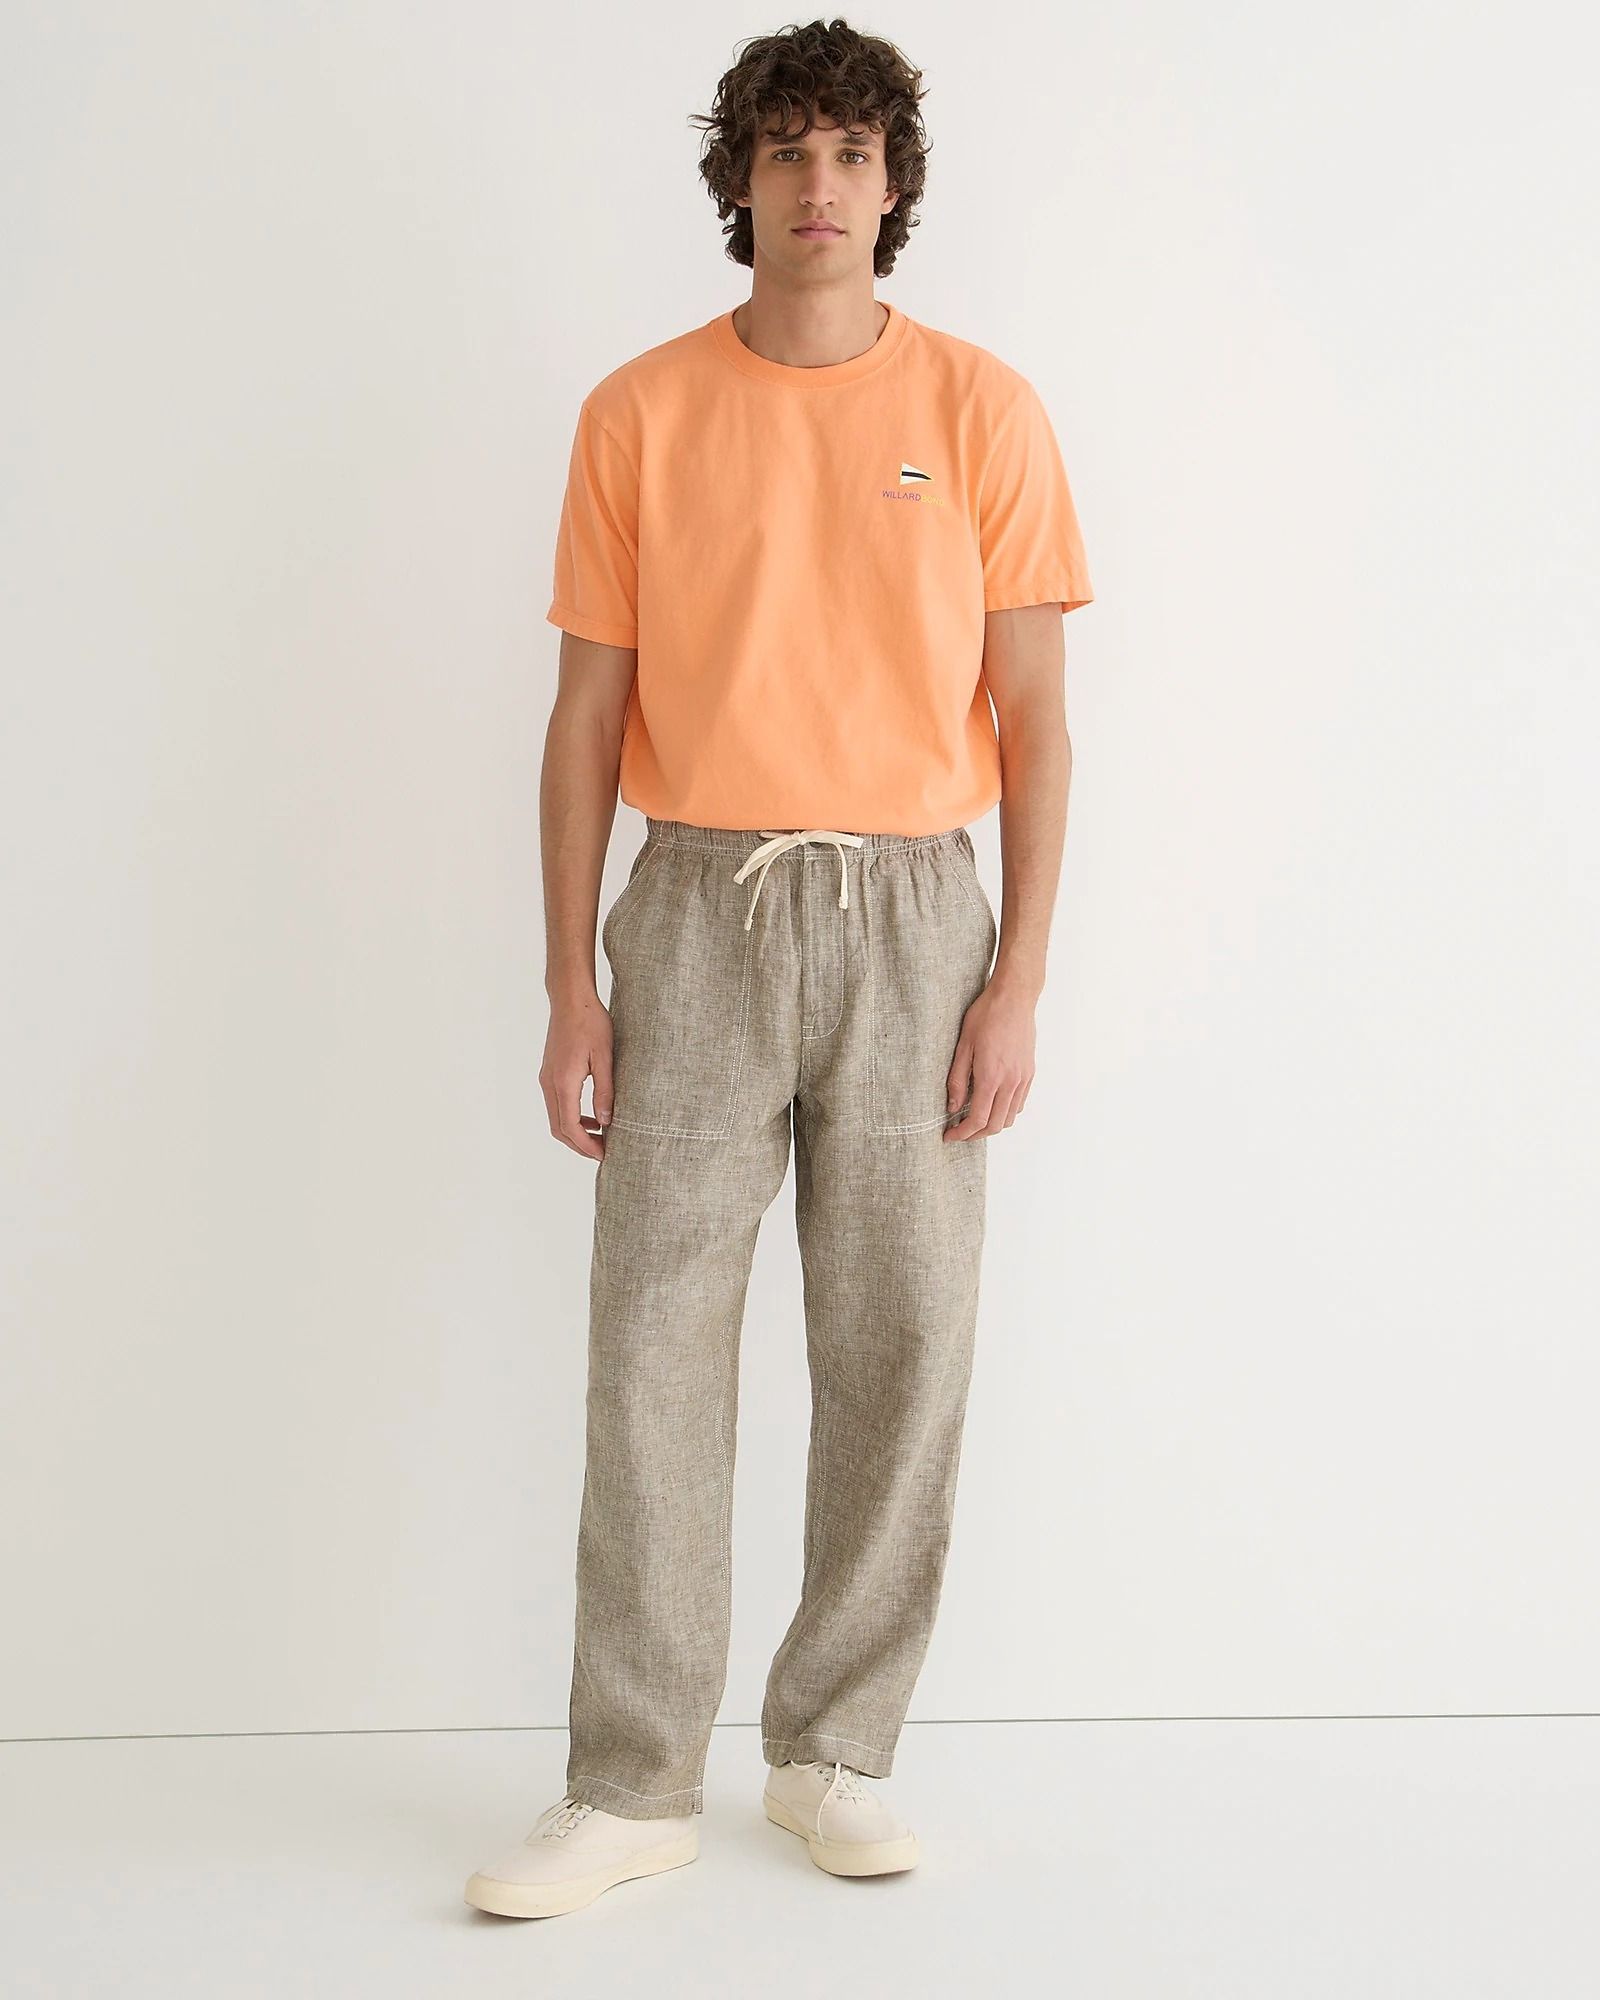 Details more than 90 mens linen beach trousers latest - in.coedo.com.vn